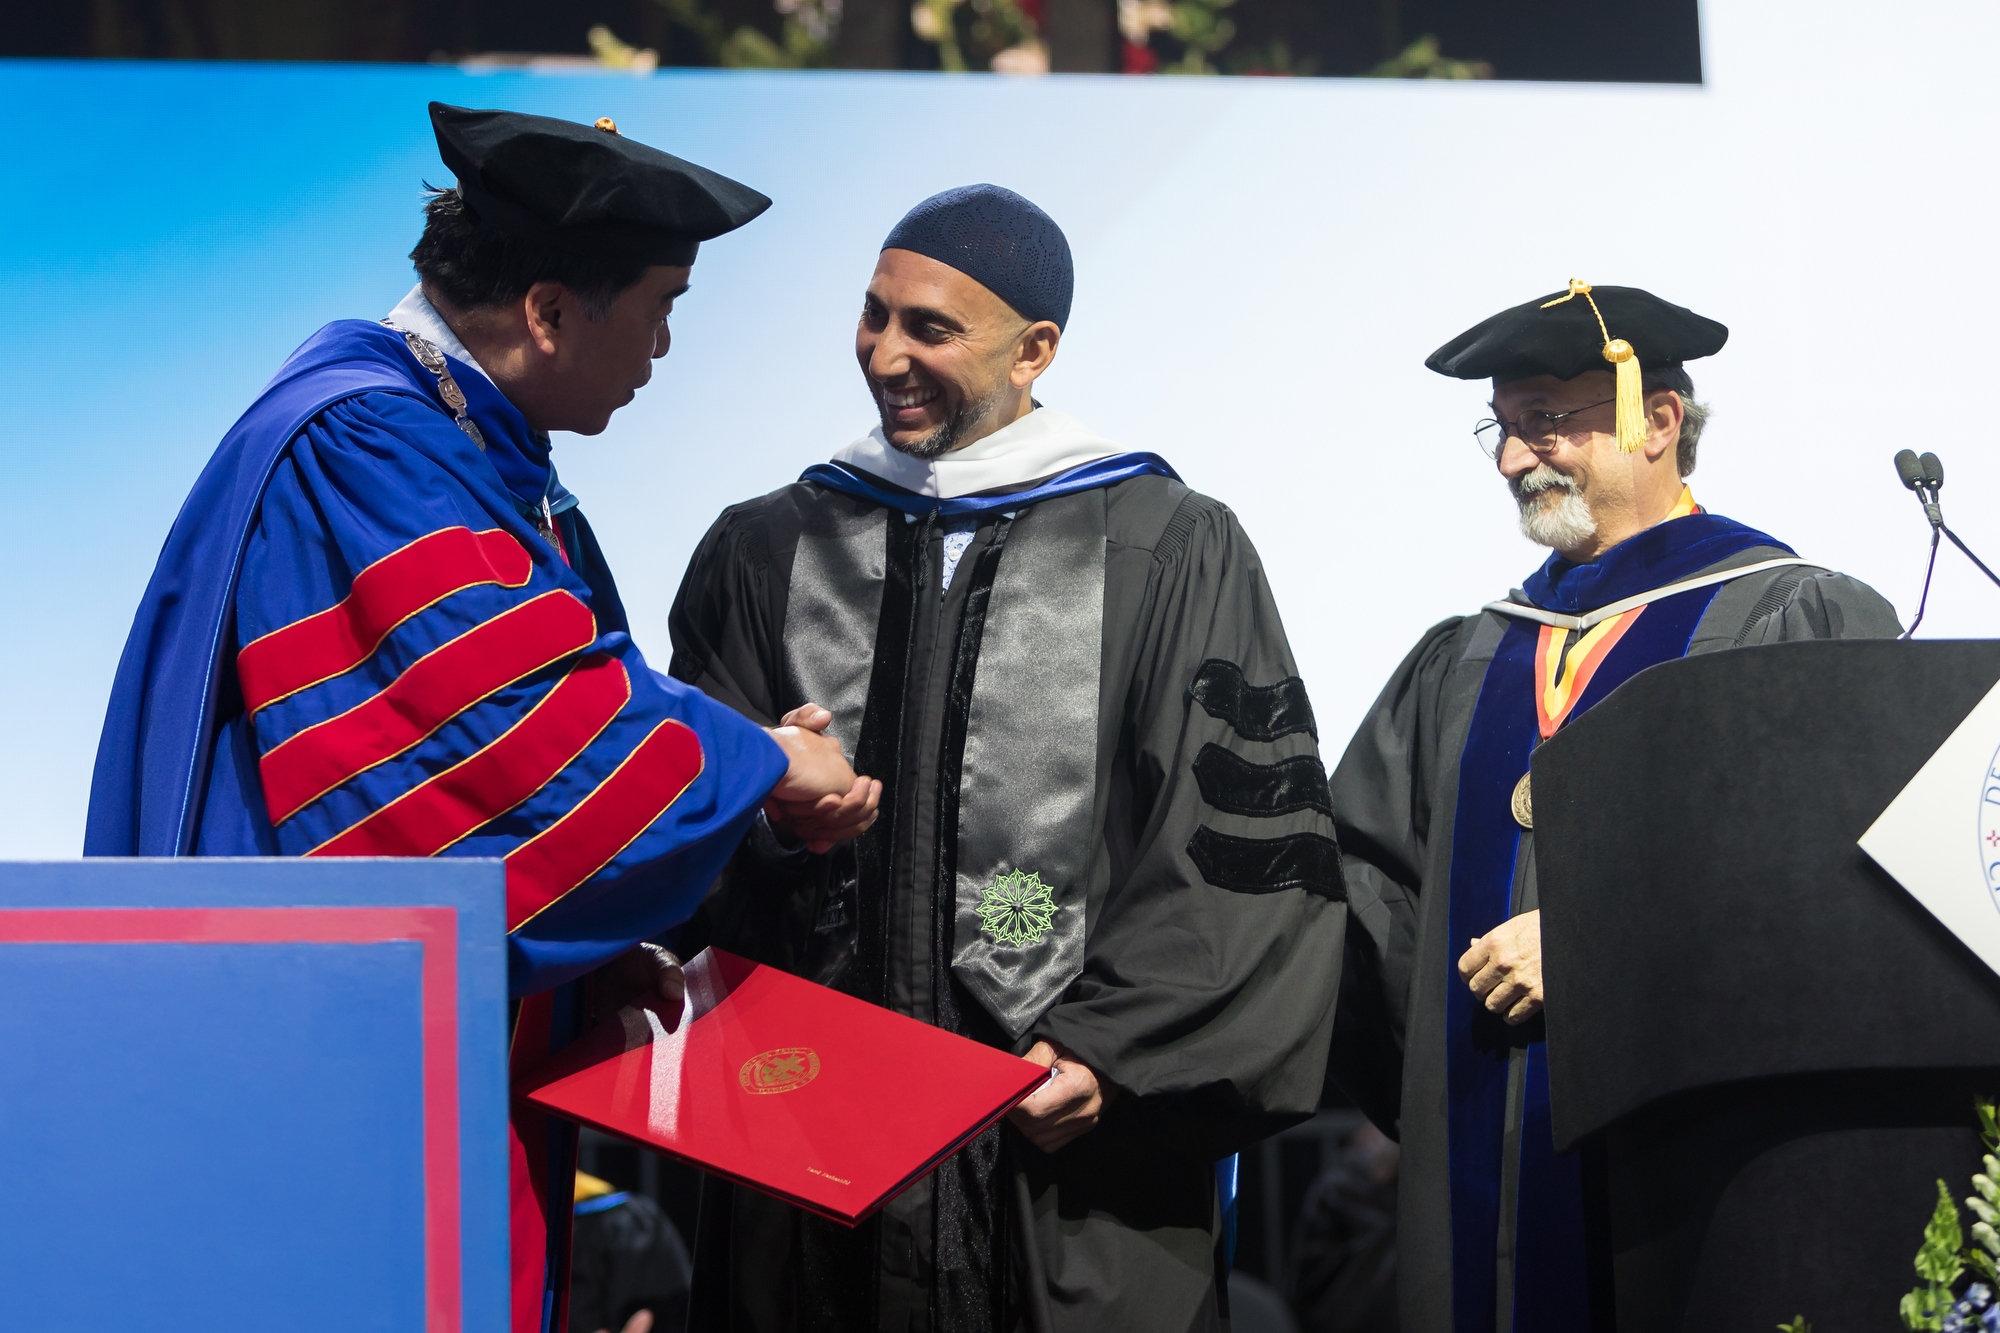 A. Gabriel Esteban, Ph.D., president of DePaul University, left, and Guillermo Vásquez de Velasco, dean, College of Liberal Arts and Social Sciences, right, congratulate honorary degree recipient Rami Nashashibi during the commencement ceremony at Wintrust Arena. Nashashibi, a 1996 alumna, is the founder and executive director of Inner-City Muslim Action Network. (DePaul University/Jeff Carrion)